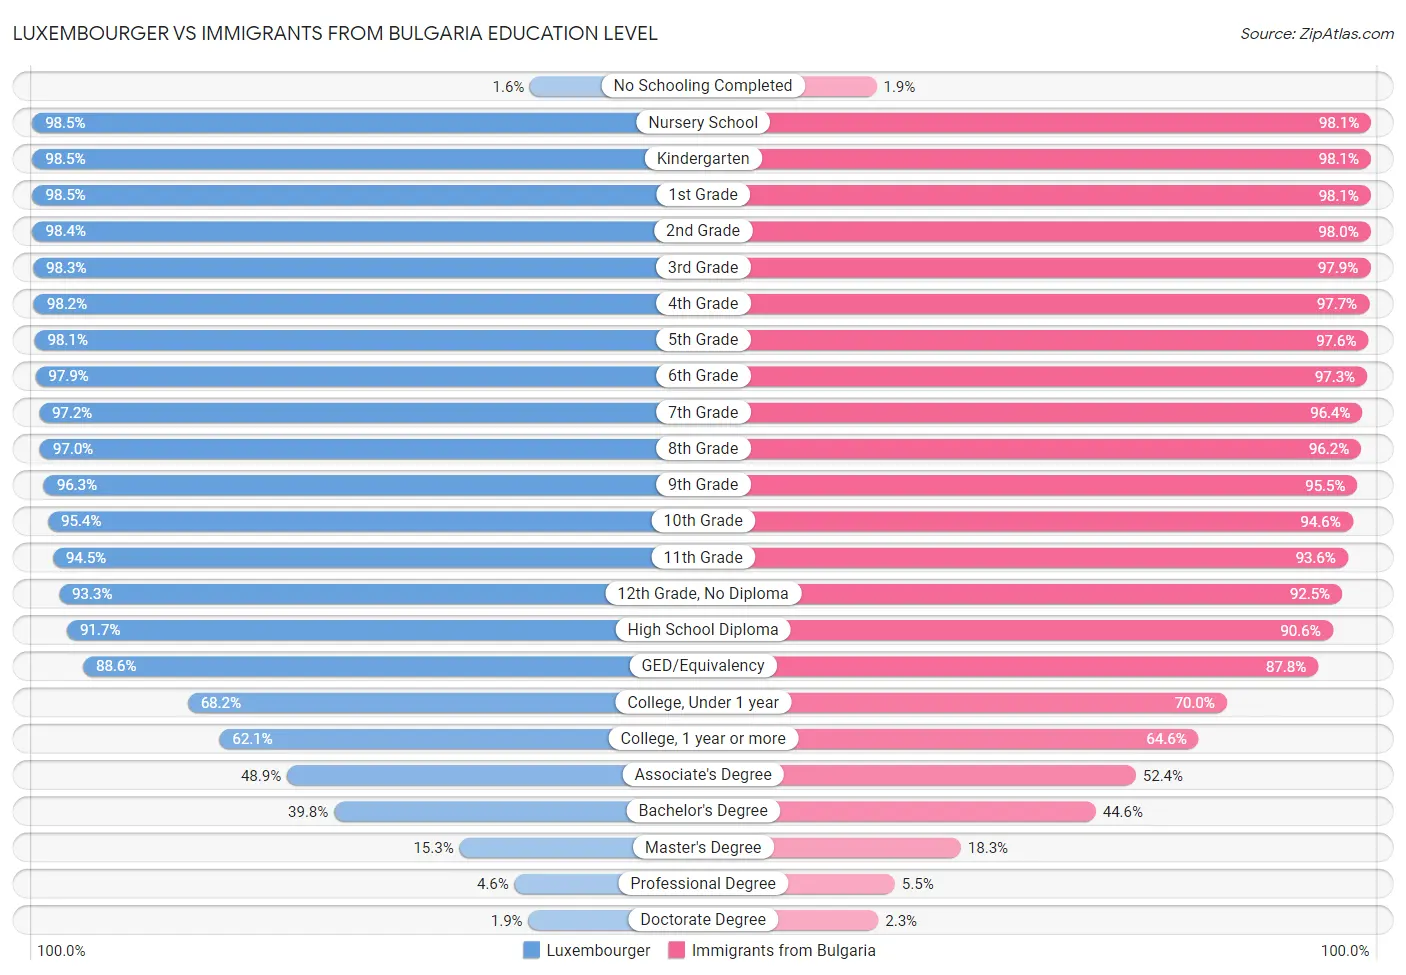 Luxembourger vs Immigrants from Bulgaria Education Level